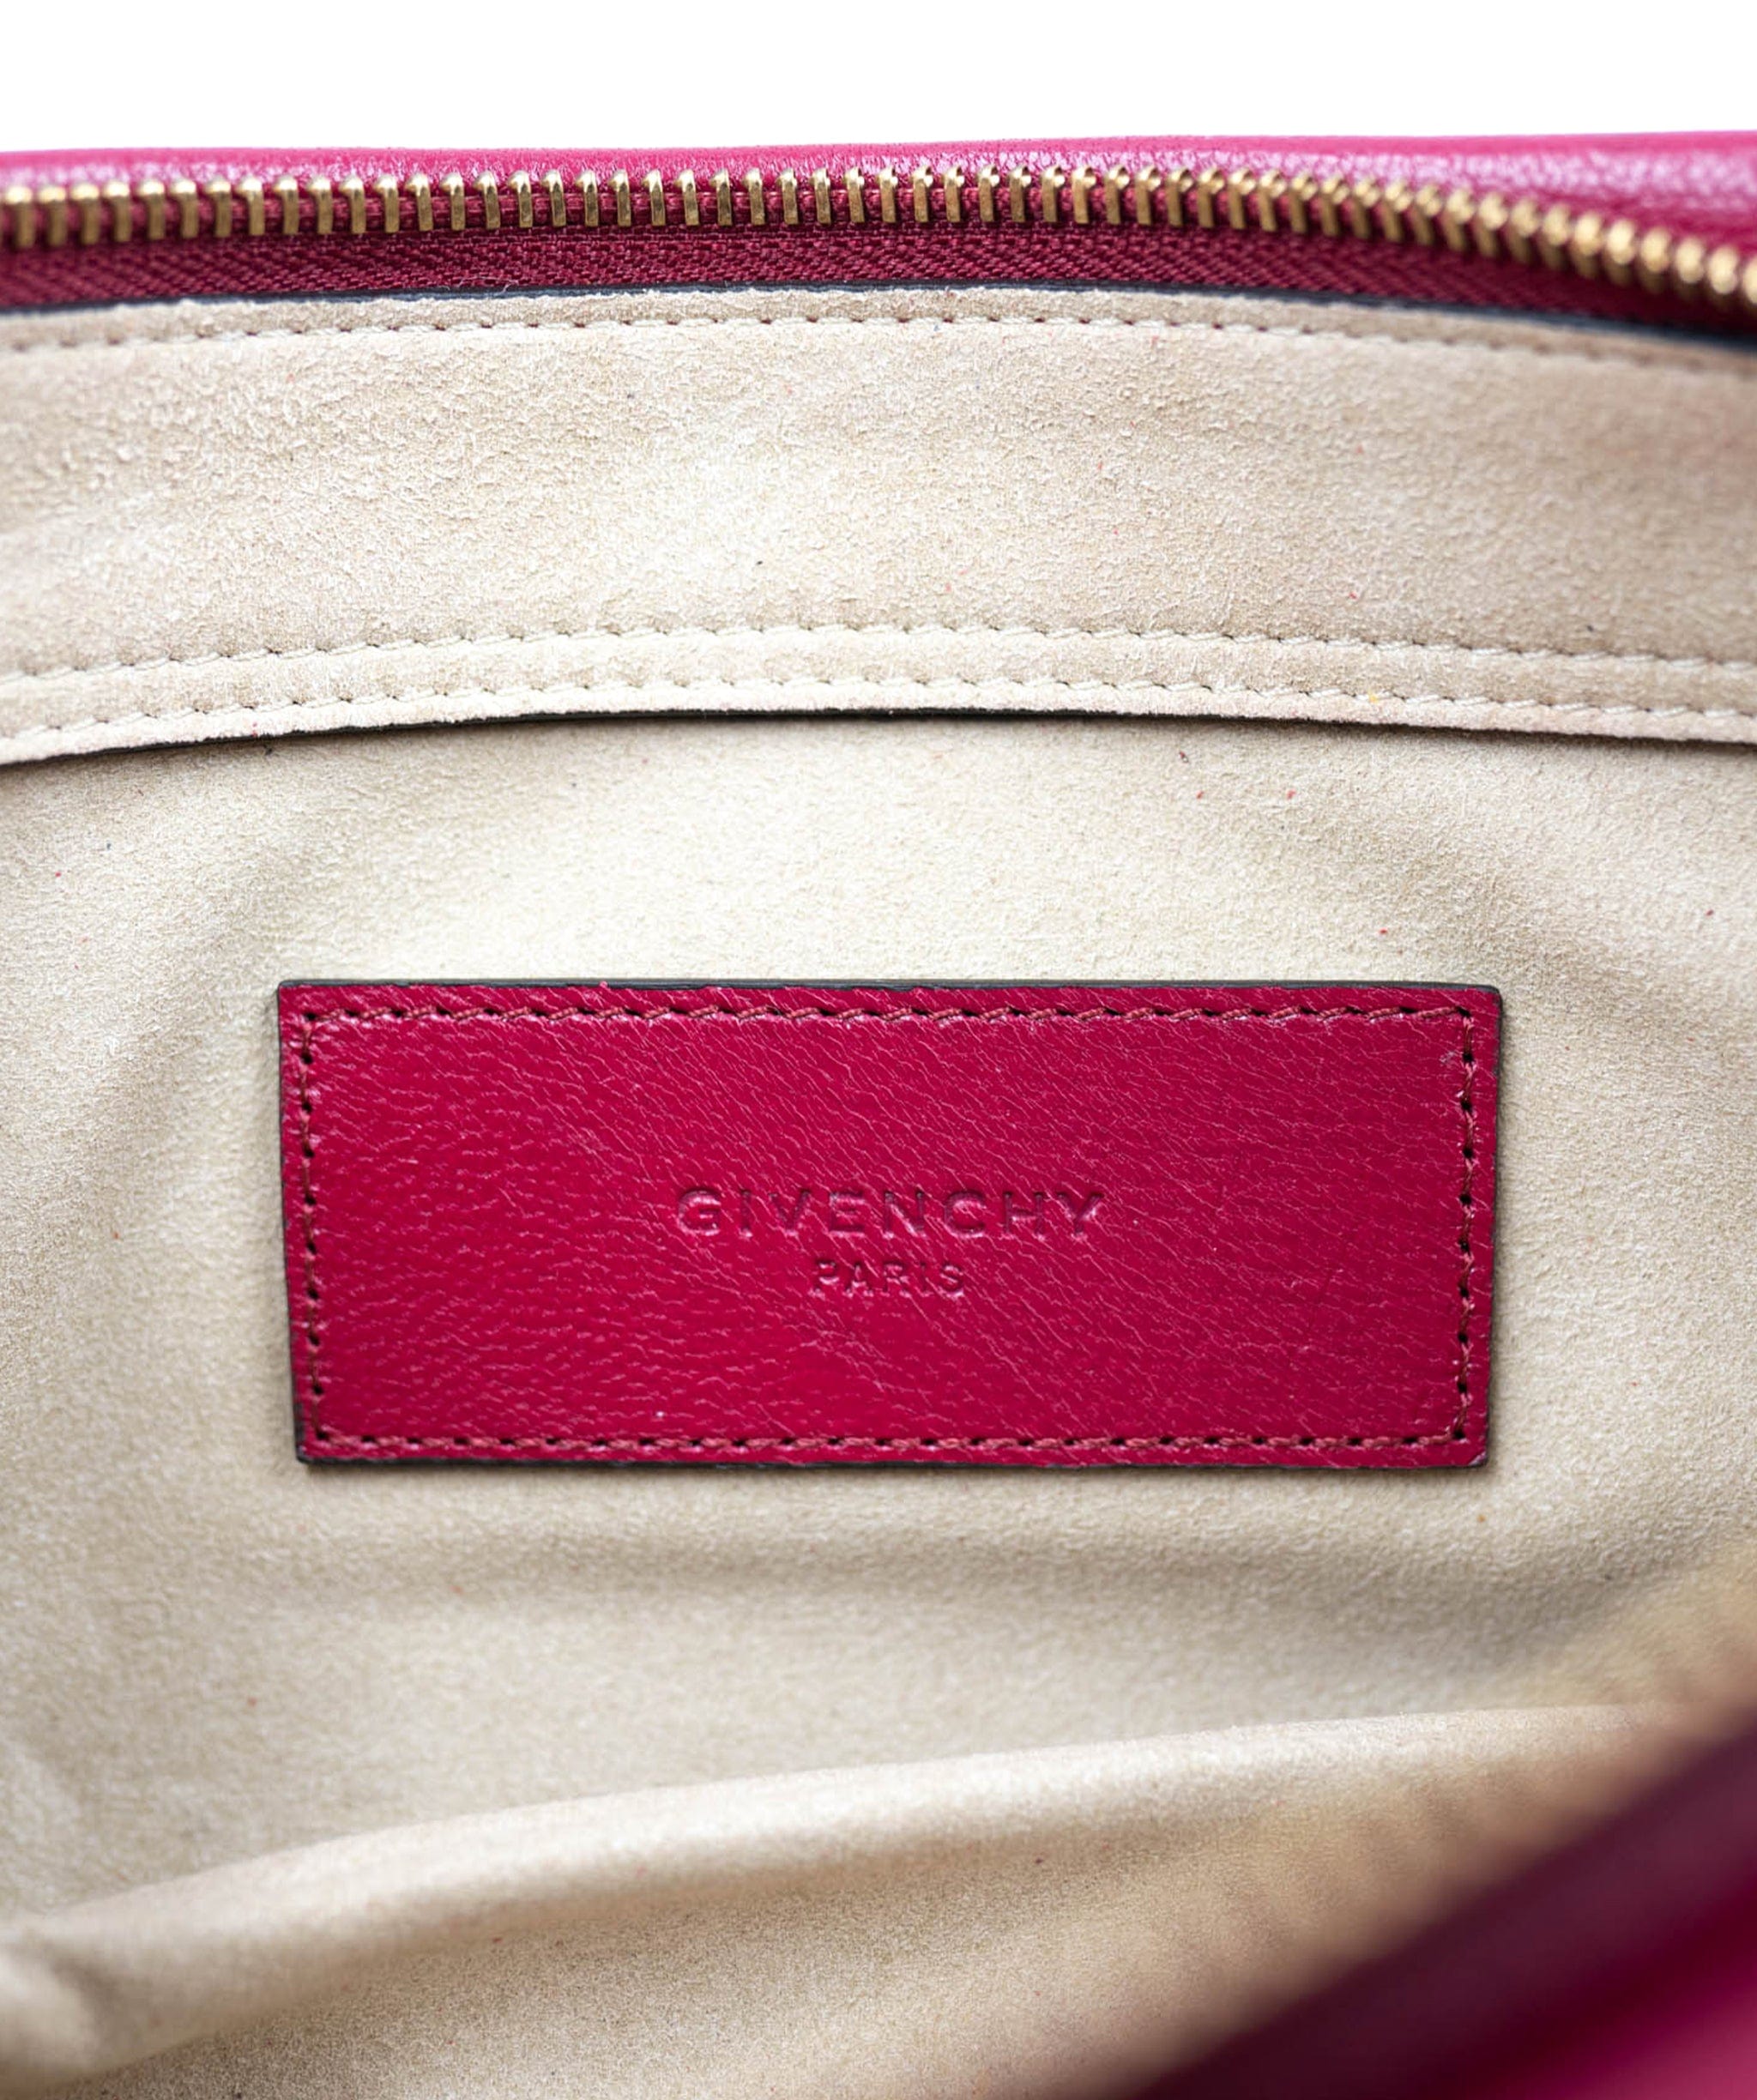 Givenchy Givenchy Red Cross Body Bag - ASL2043